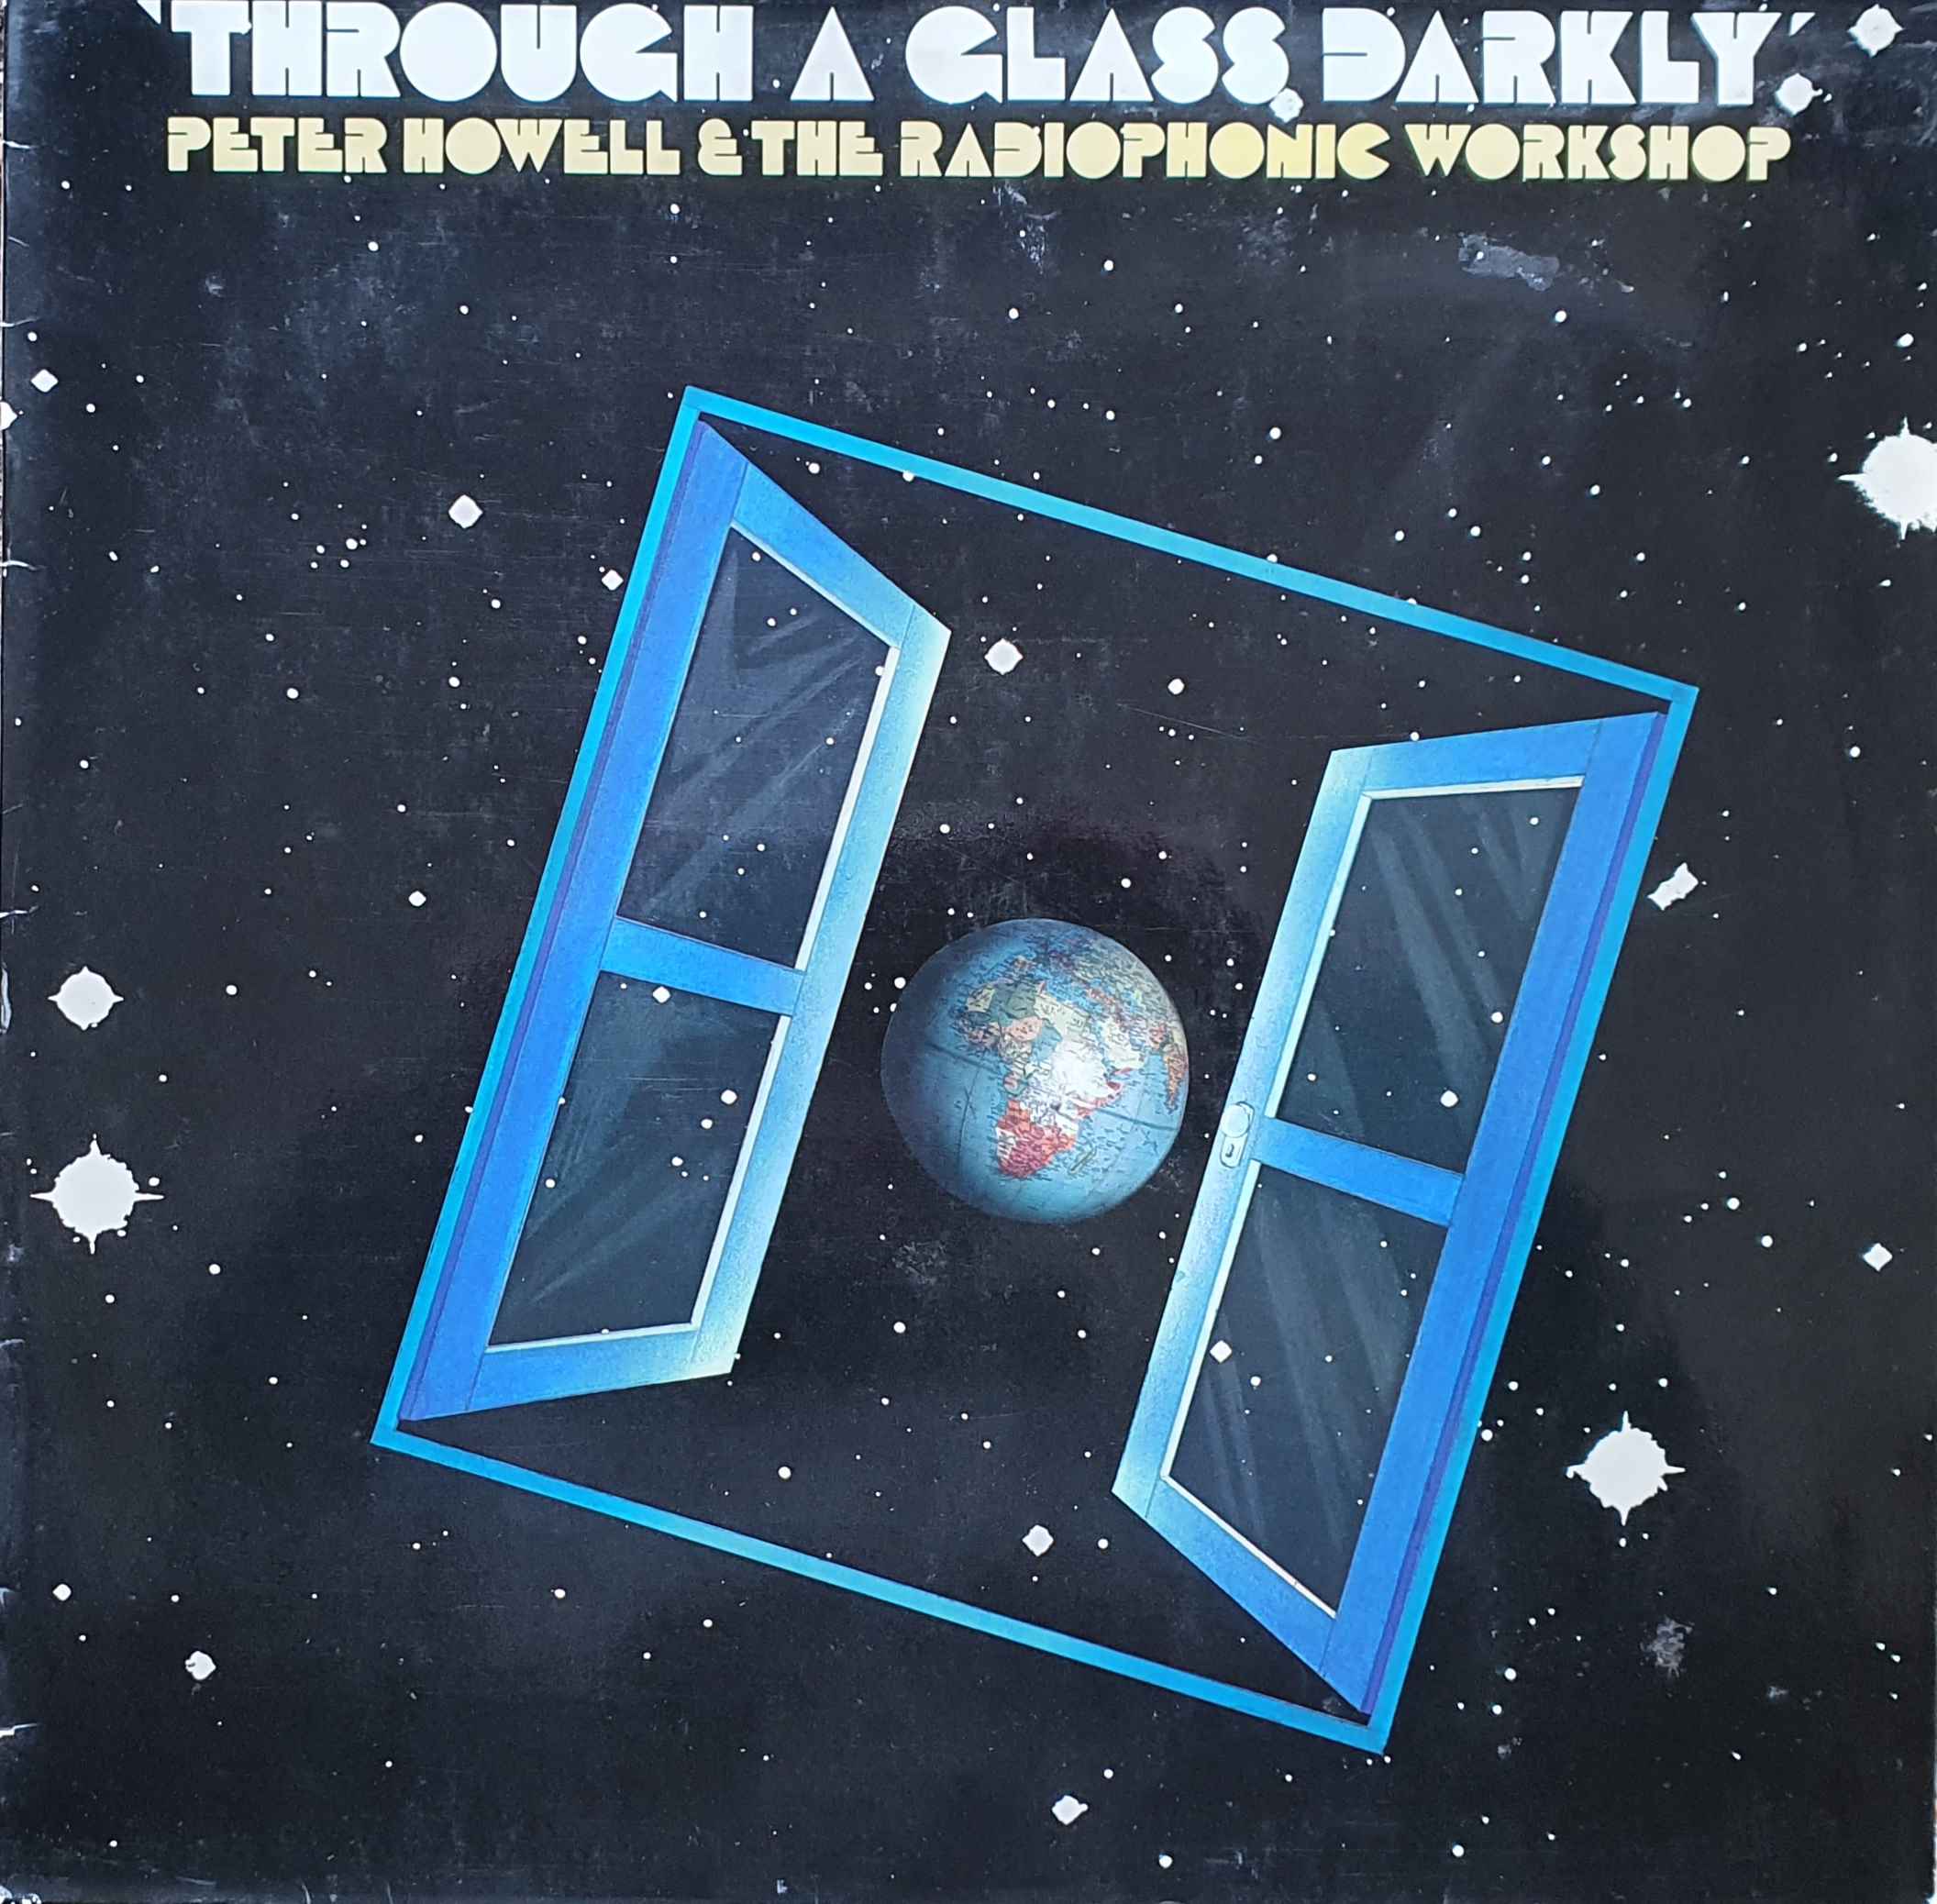 Picture of INT 148.000 Through a glass darkly by artist Peter Howell and the Radiophonic Workshop from the BBC albums - Records and Tapes library